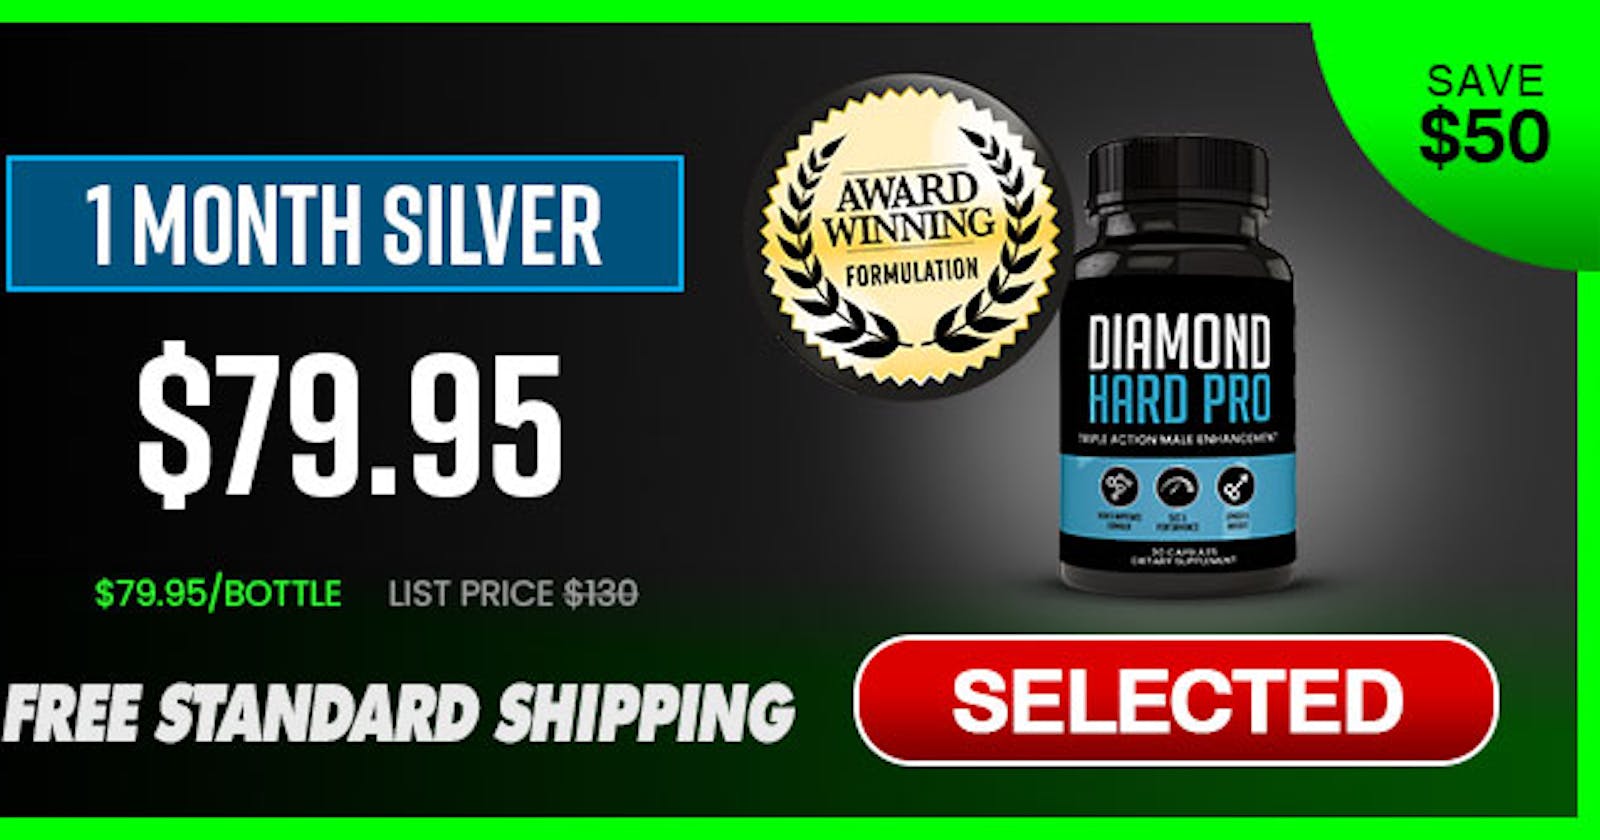 [ALERT] Diamond Hard Pro Male Enhancement - (Urgent Warning) Does It Effective or Trusted?